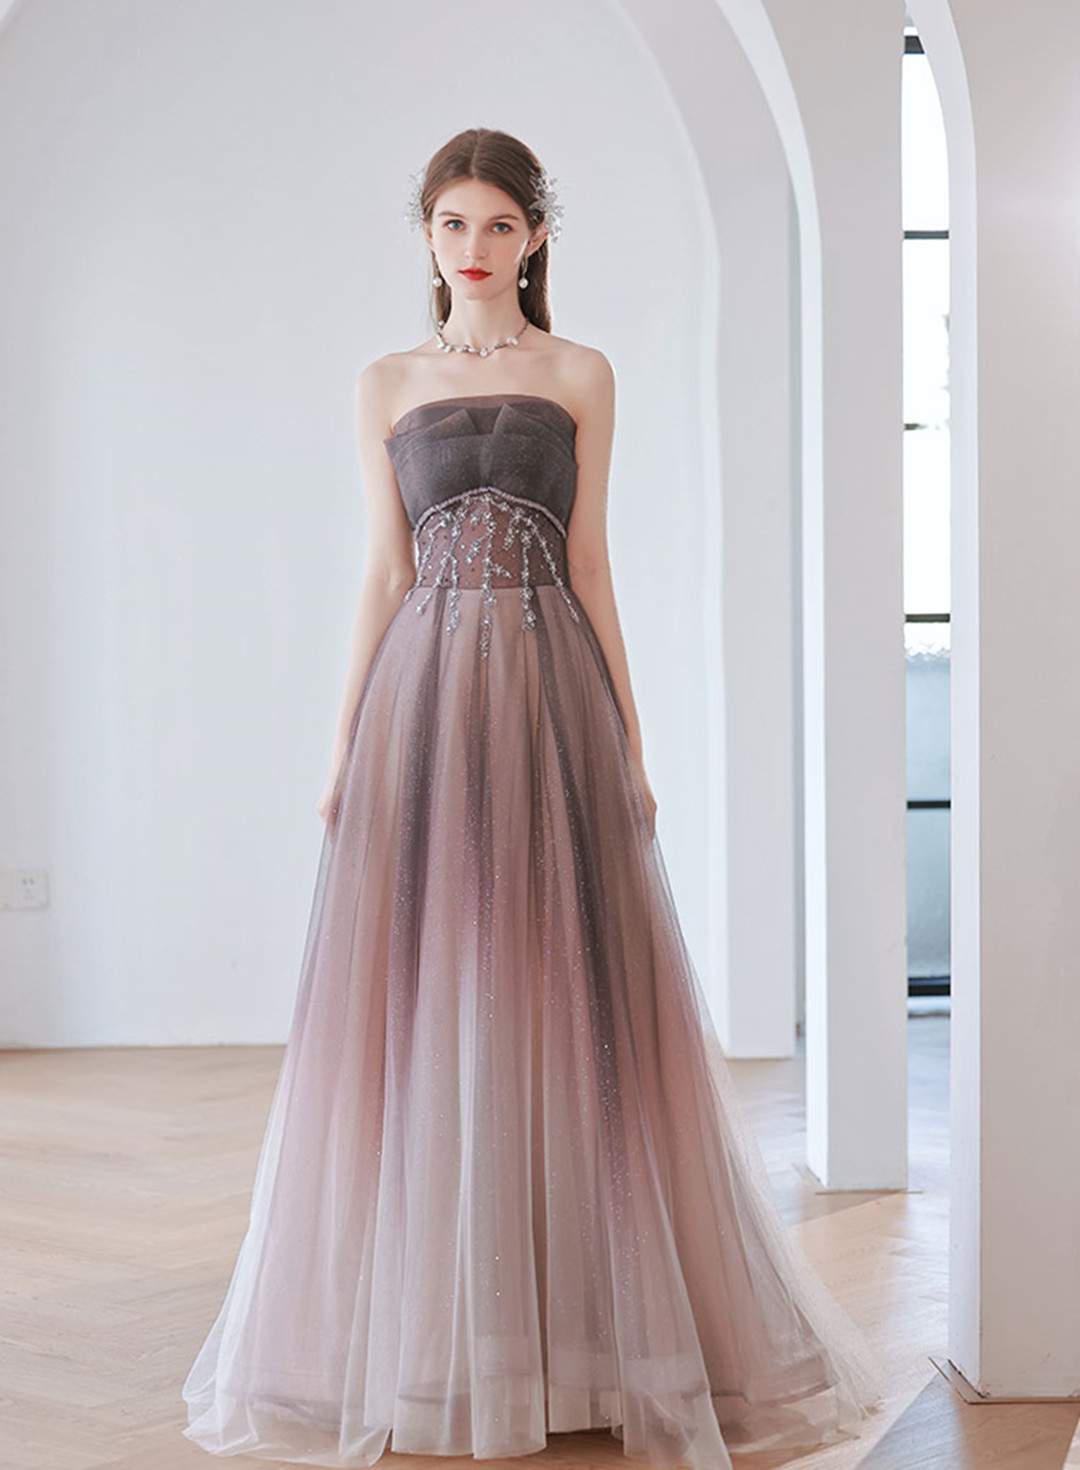 Shiny Tulle Gradient Floor Length Lace-up Party Dress, Long Evening Gown, Formal Dresses